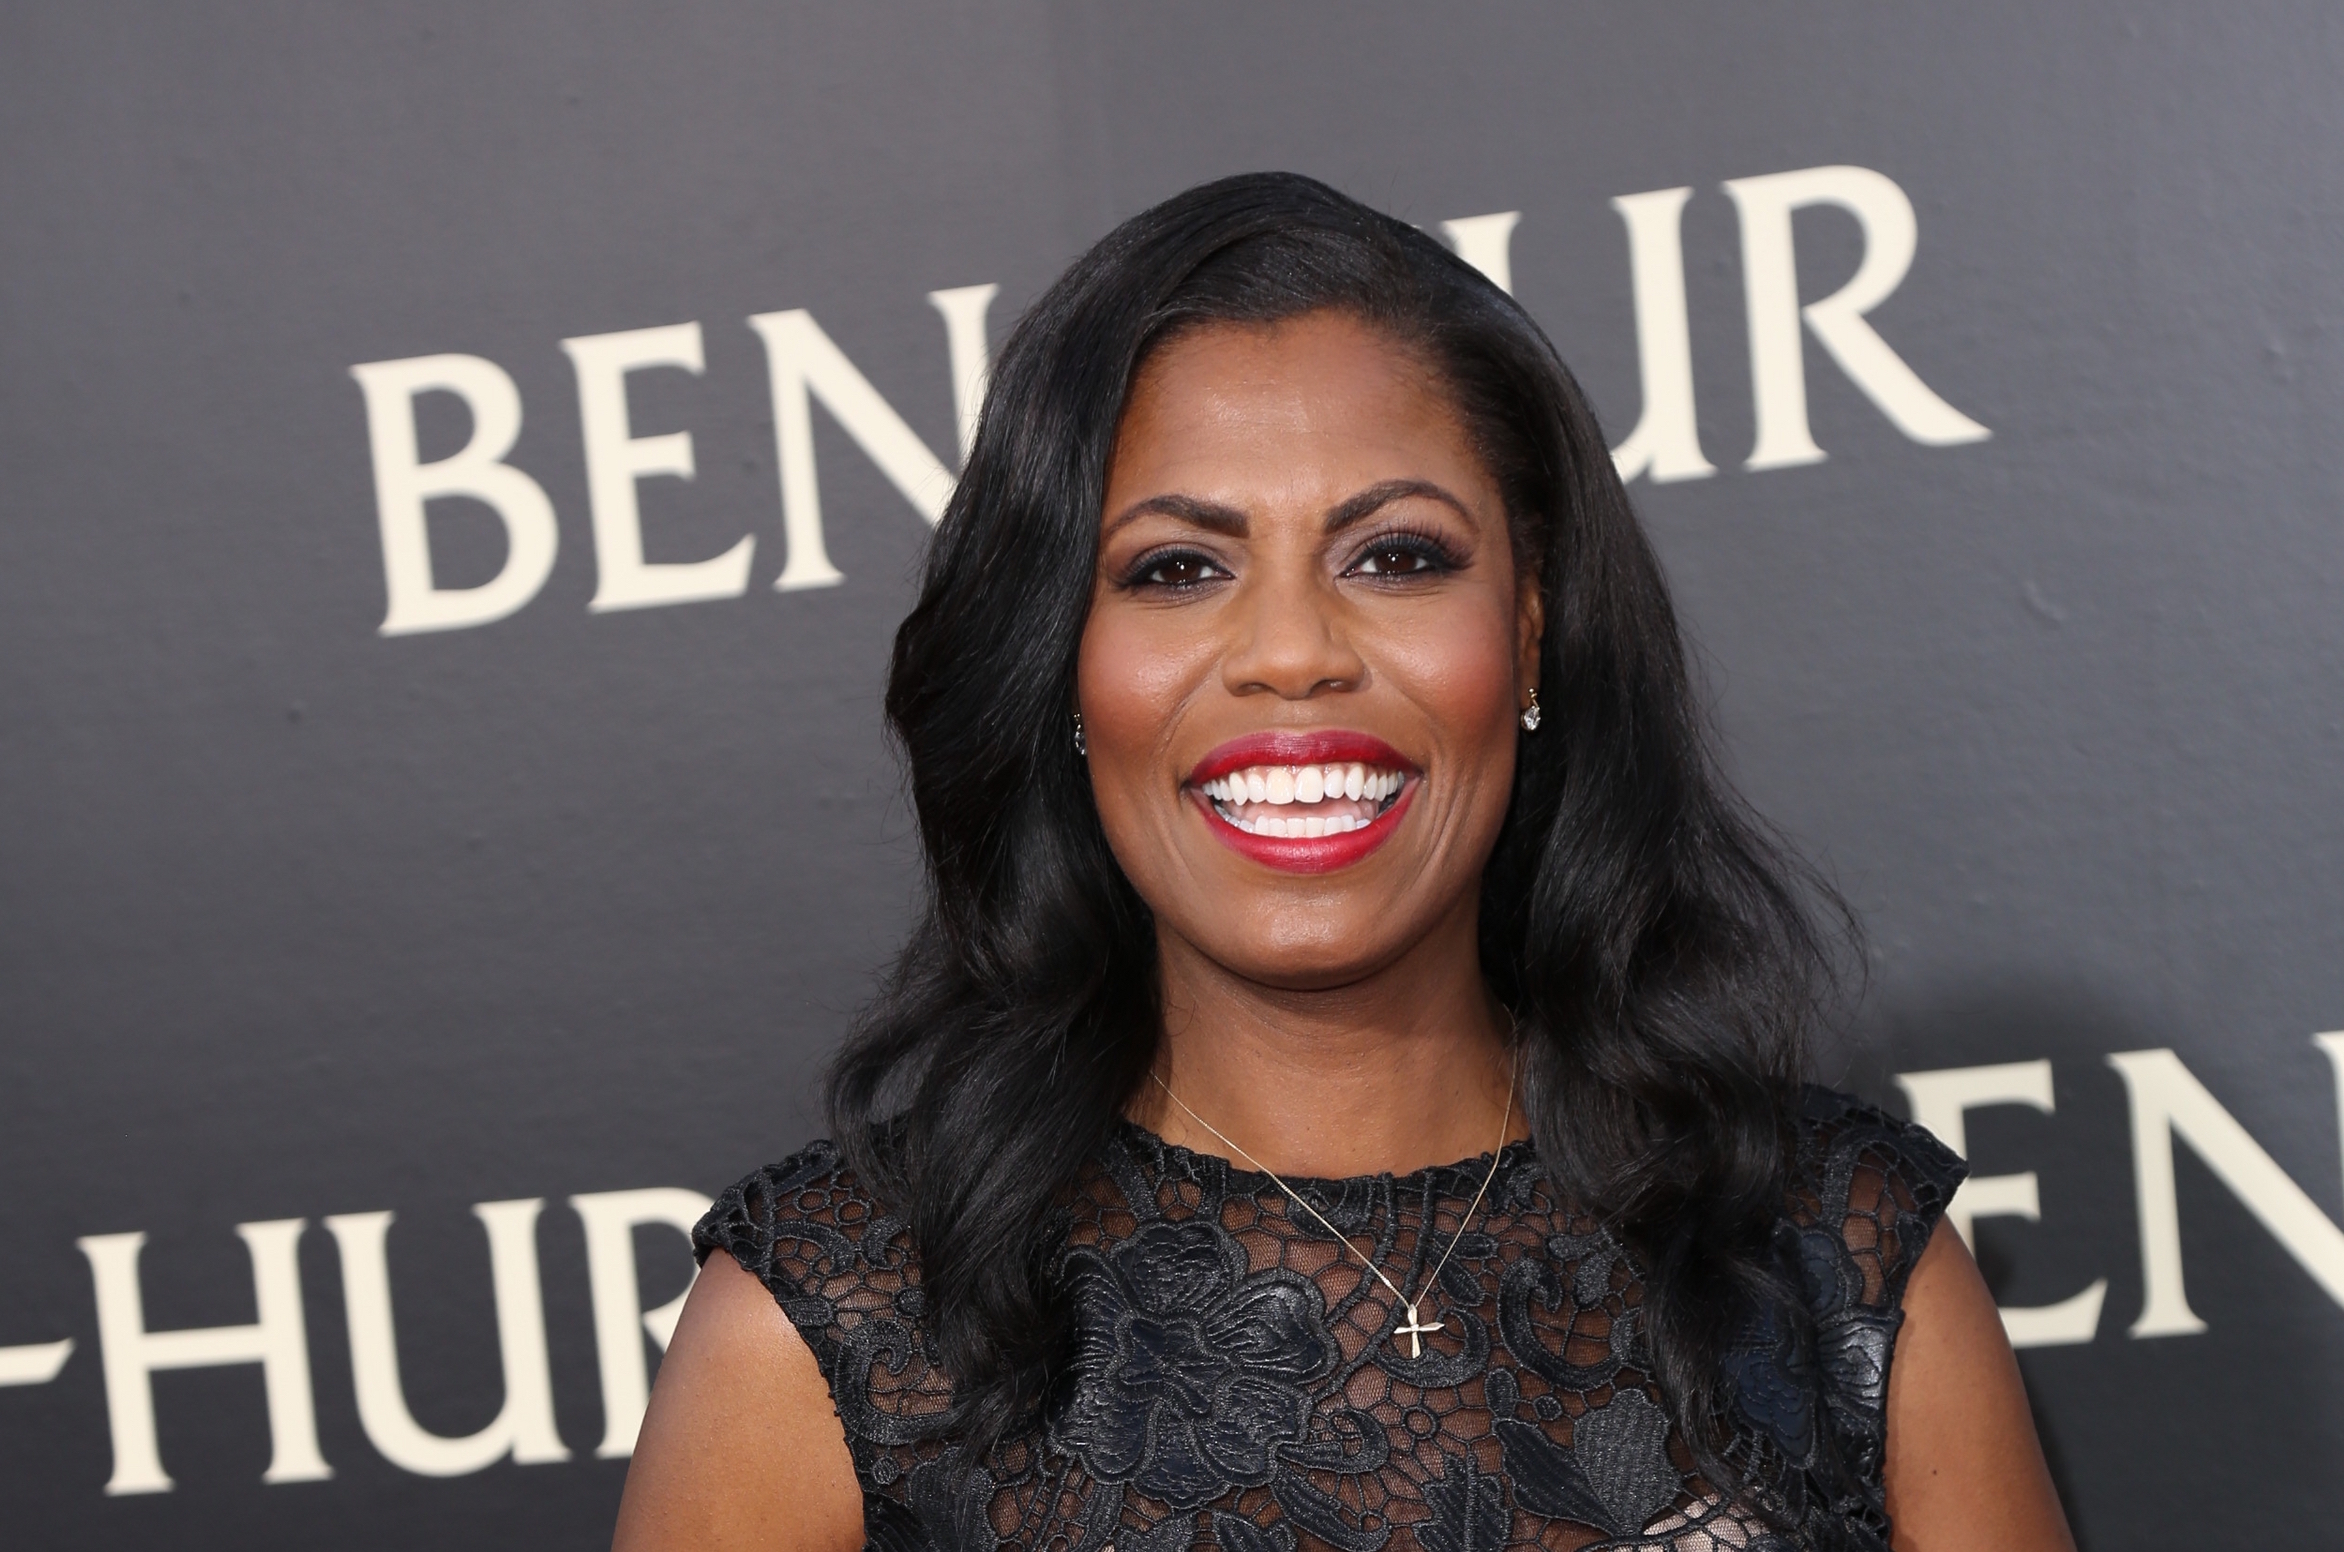 Omarosa manigault hot ♥ The guy scraped together all of the 